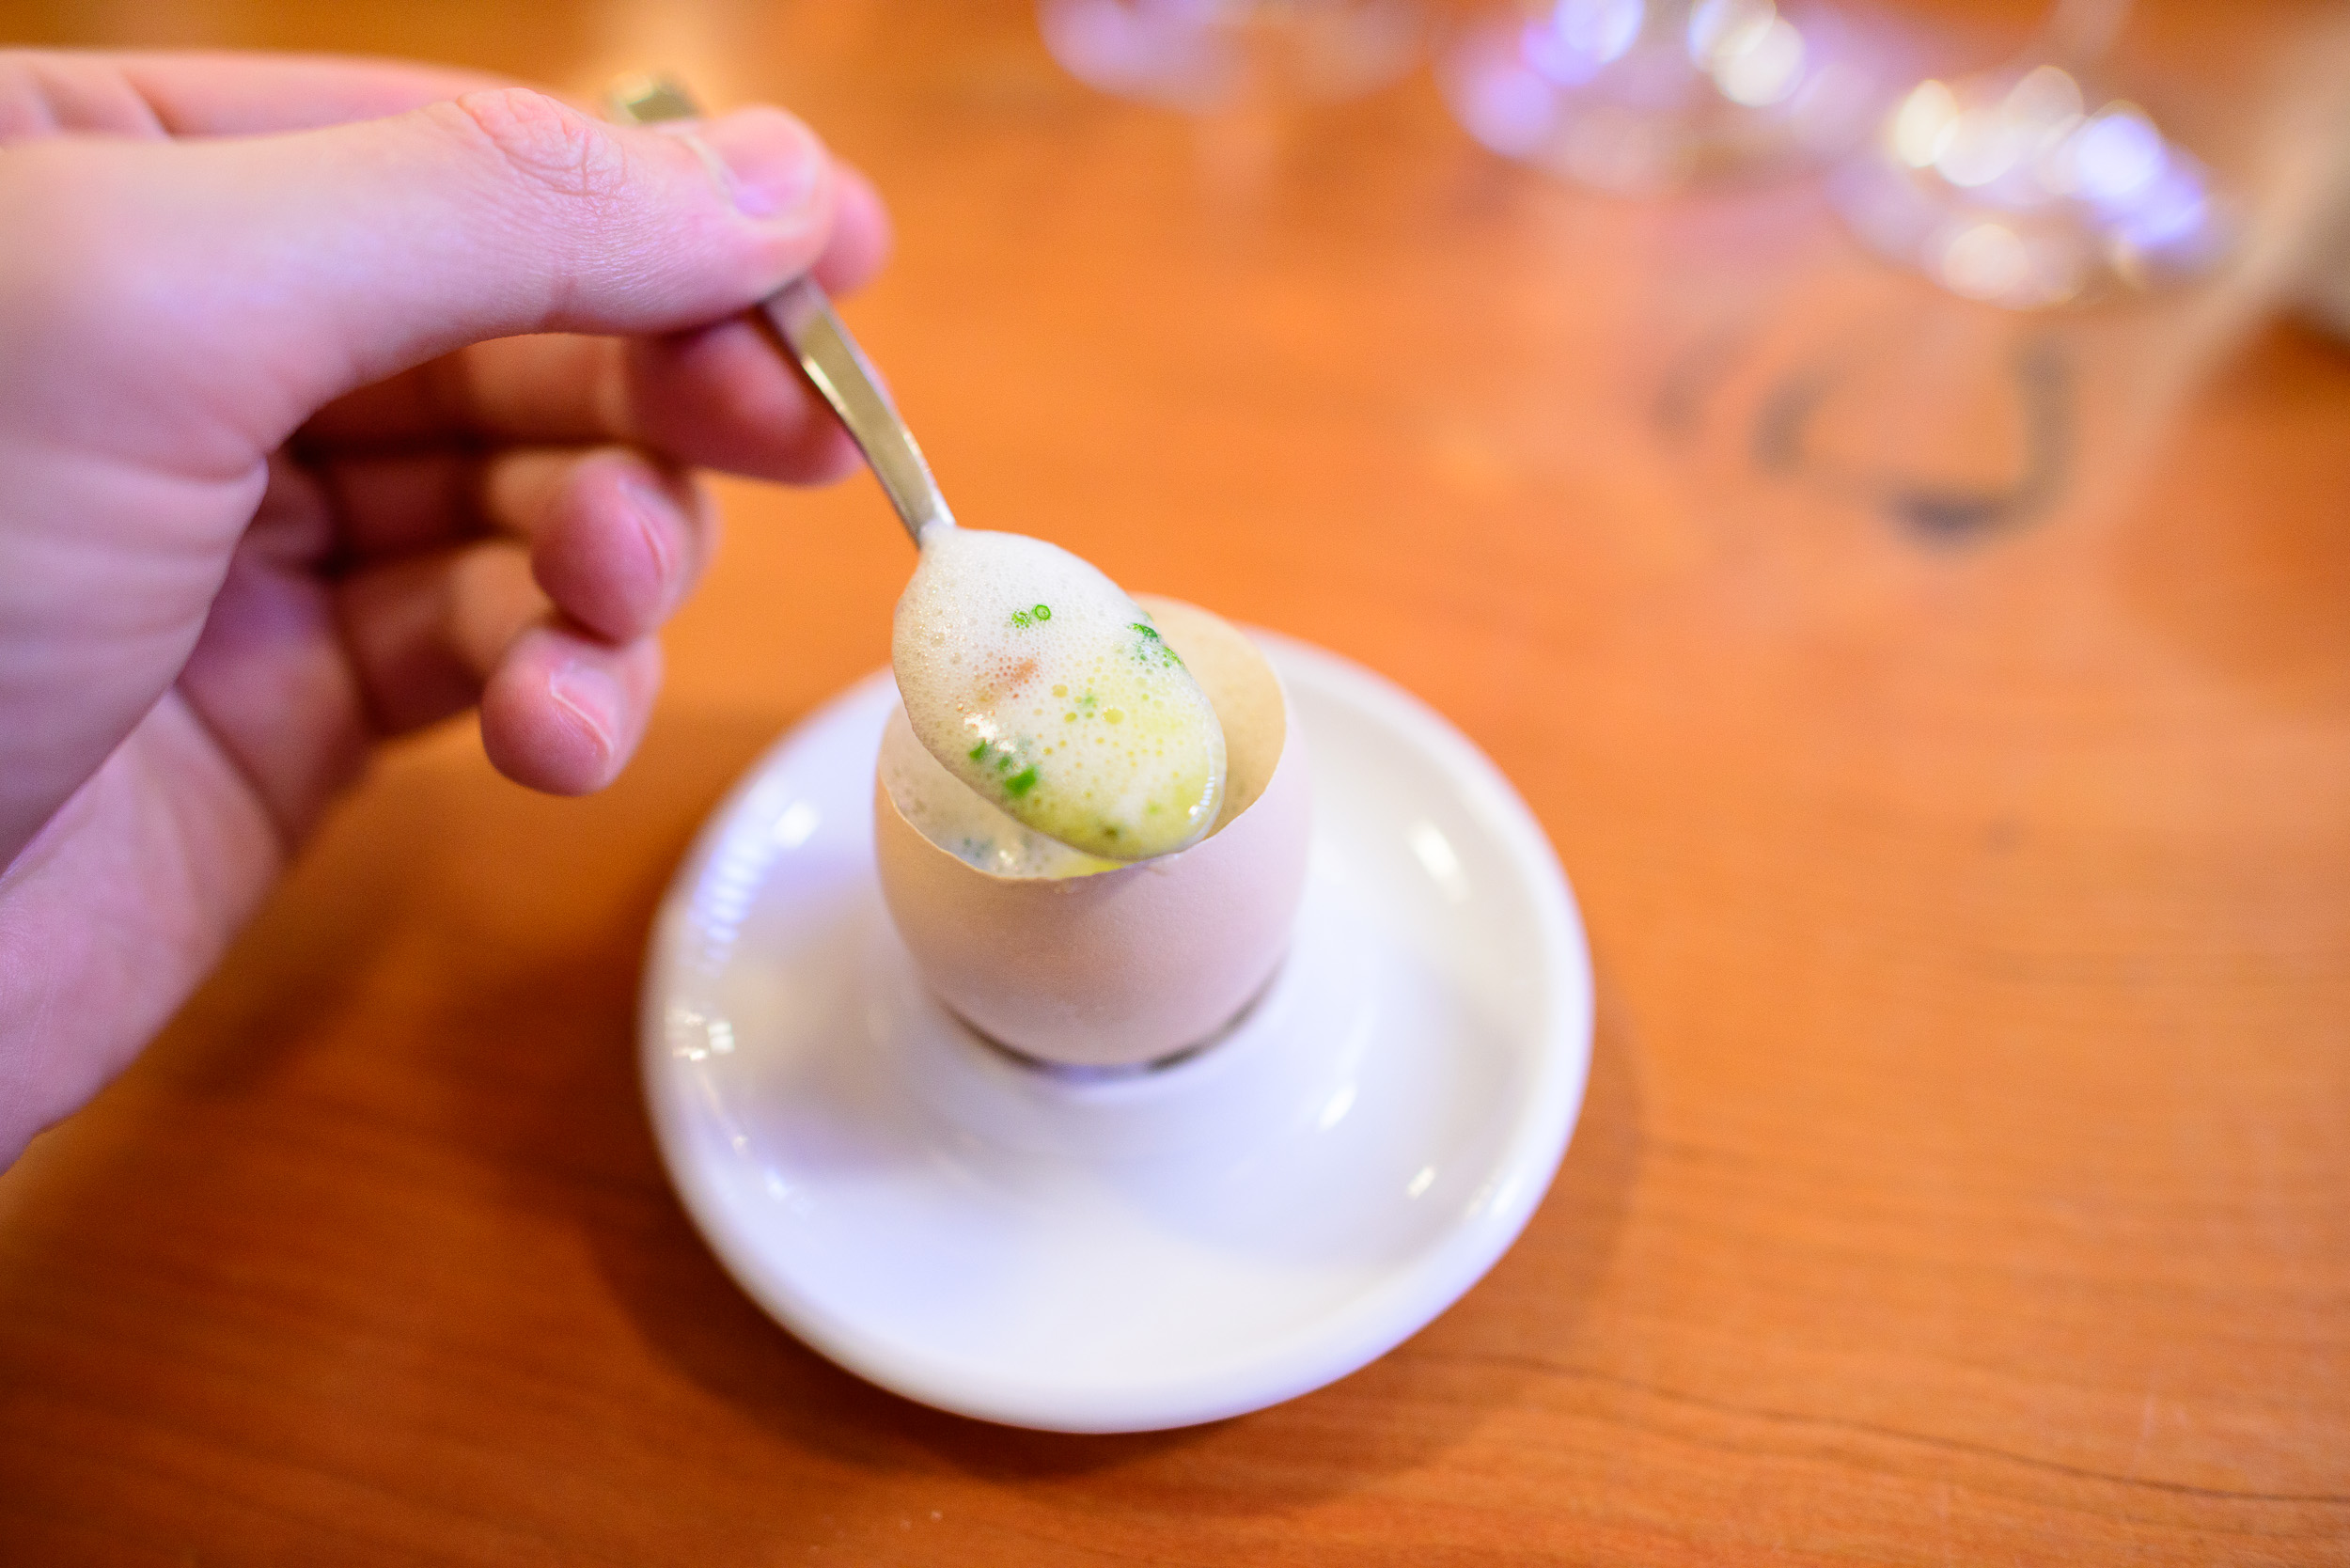 11th Course: Slow-poached egg with ragoût of leeks roasted over